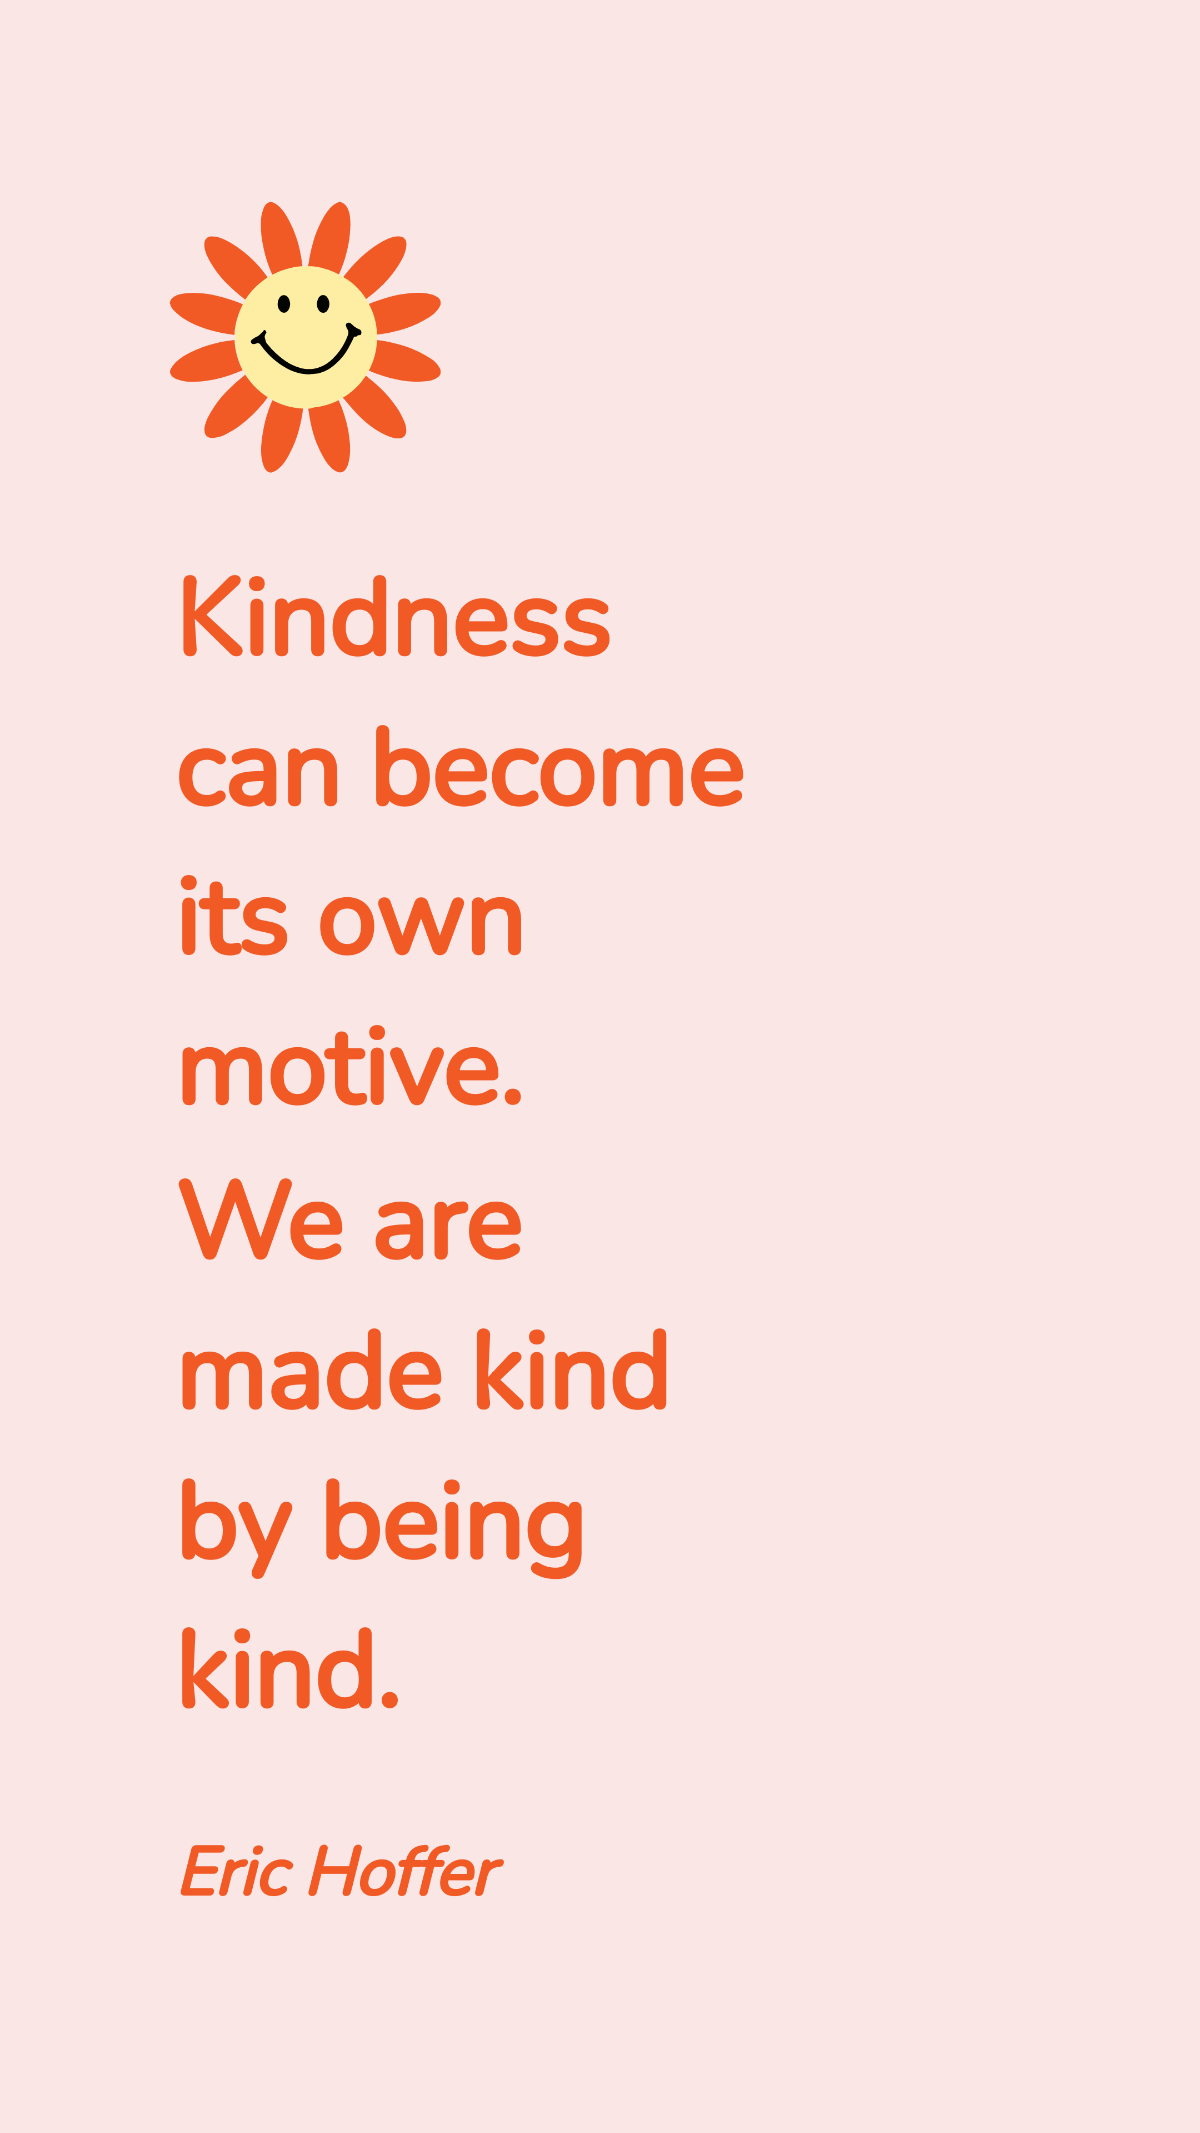 Eric Hoffer - Kindness can become its own motive. We are made kind by being kind. Template